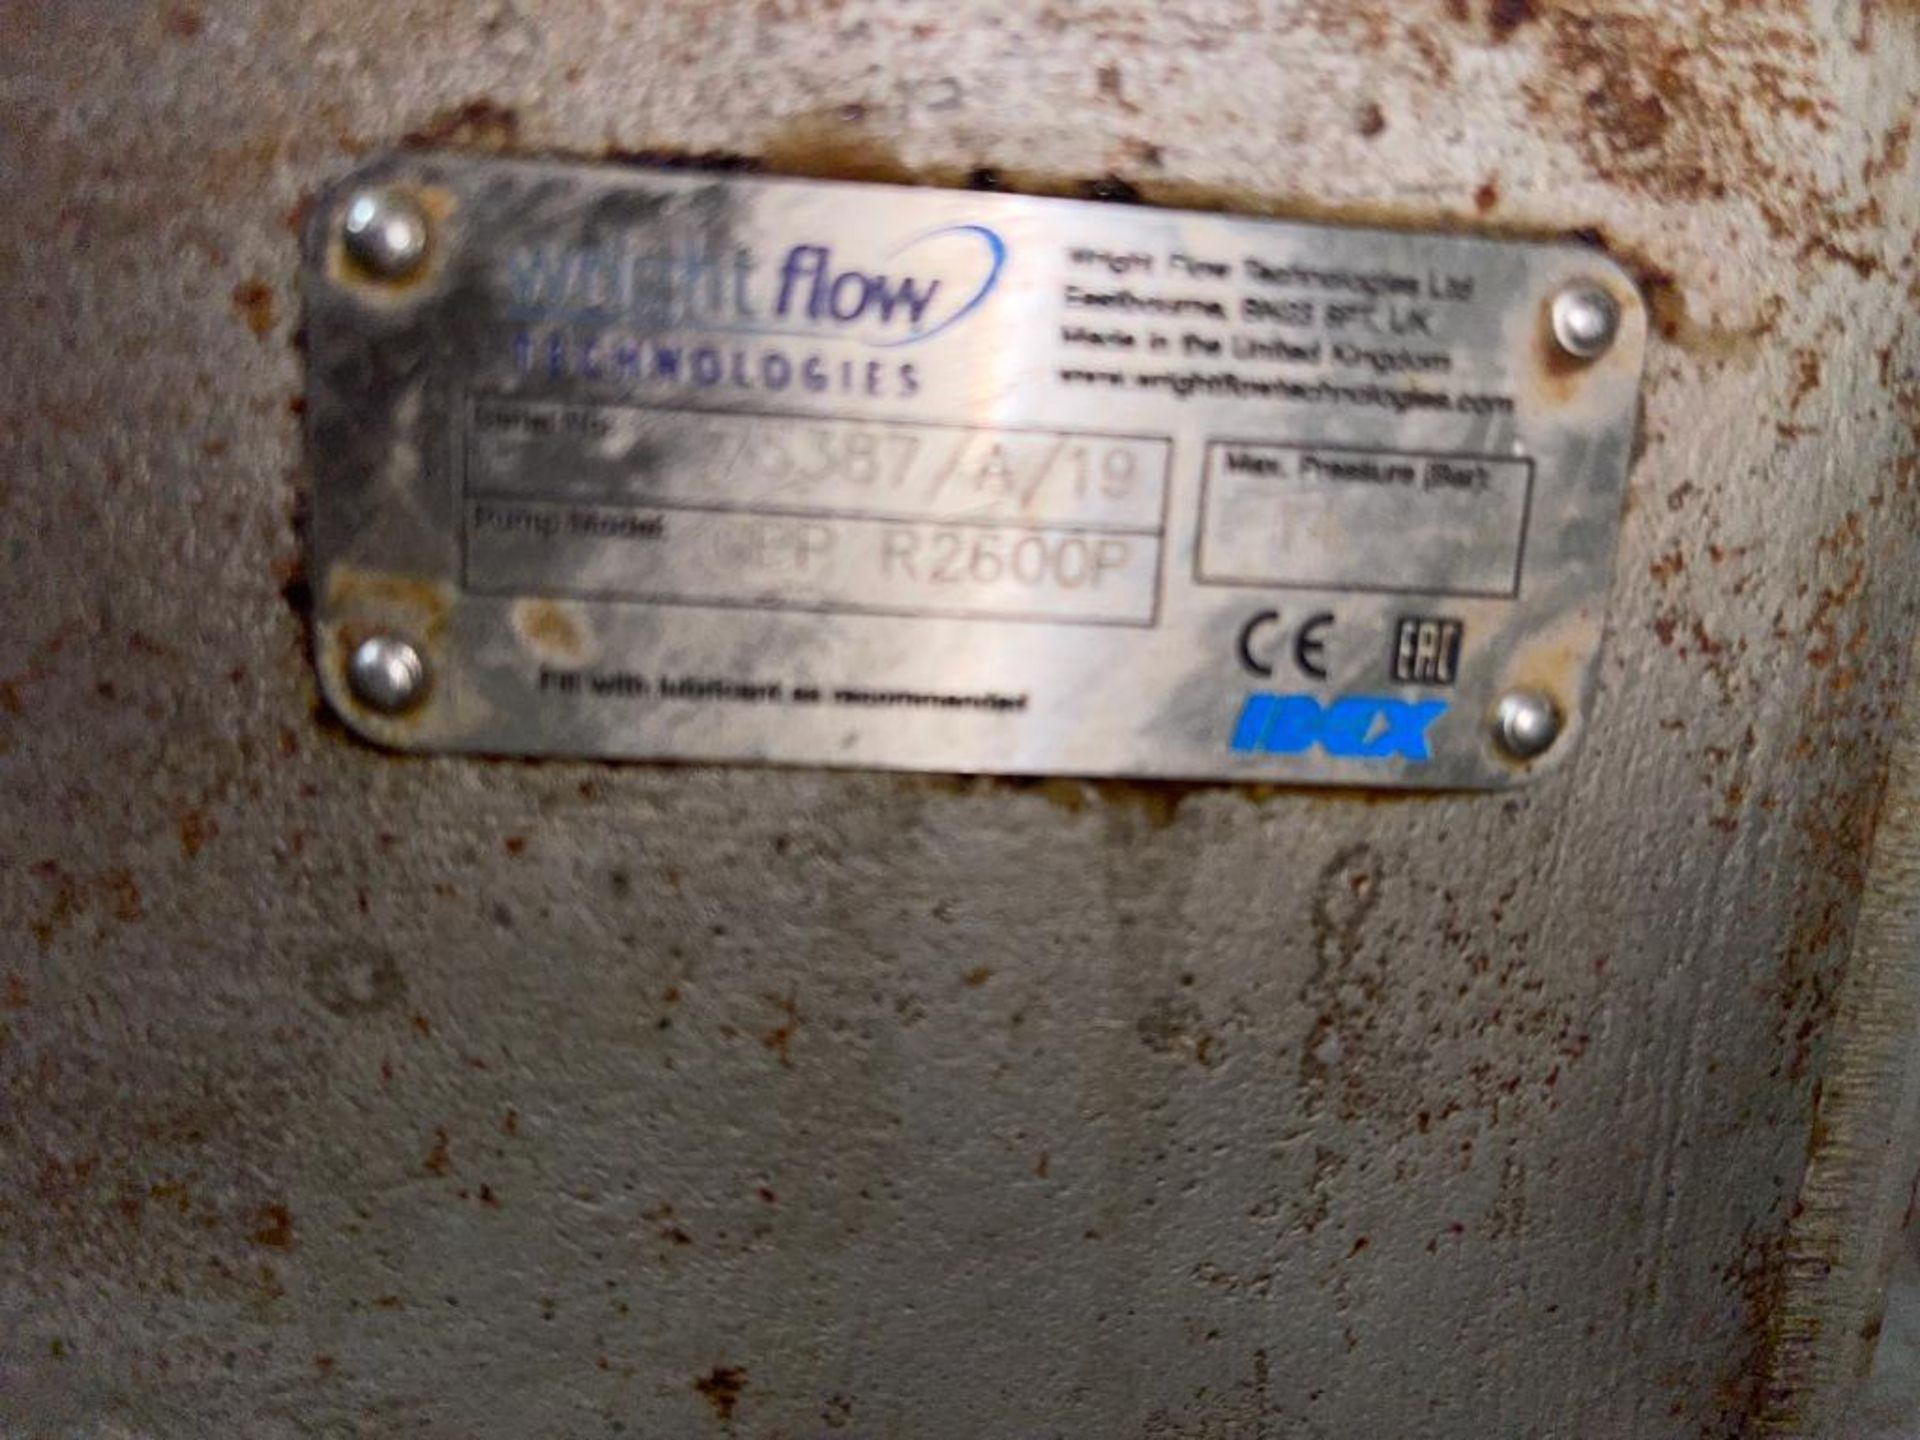 Wright Flow PD pump model CPP_R2600P, 4 in. sanitary fittings SS 10 hp motor - Located in Tifton, GA - Image 19 of 21